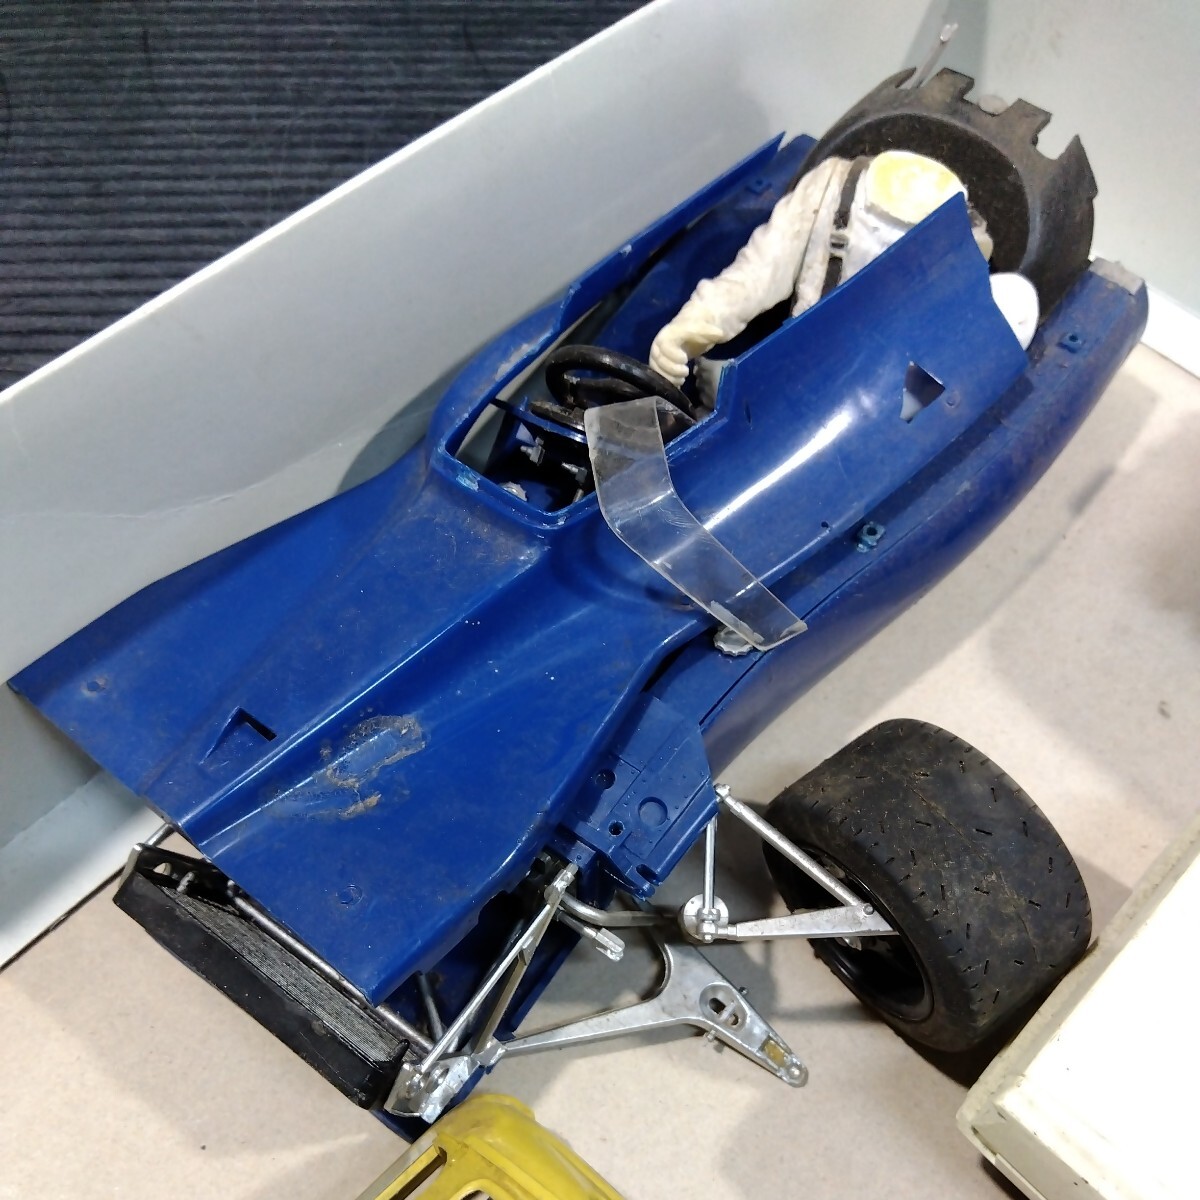  present condition goods collection settled automobile plastic model parts parts taking . also passenger vehicle Formula F-1 racing car together Showa Retro Kyosho, Tamiya series toy 